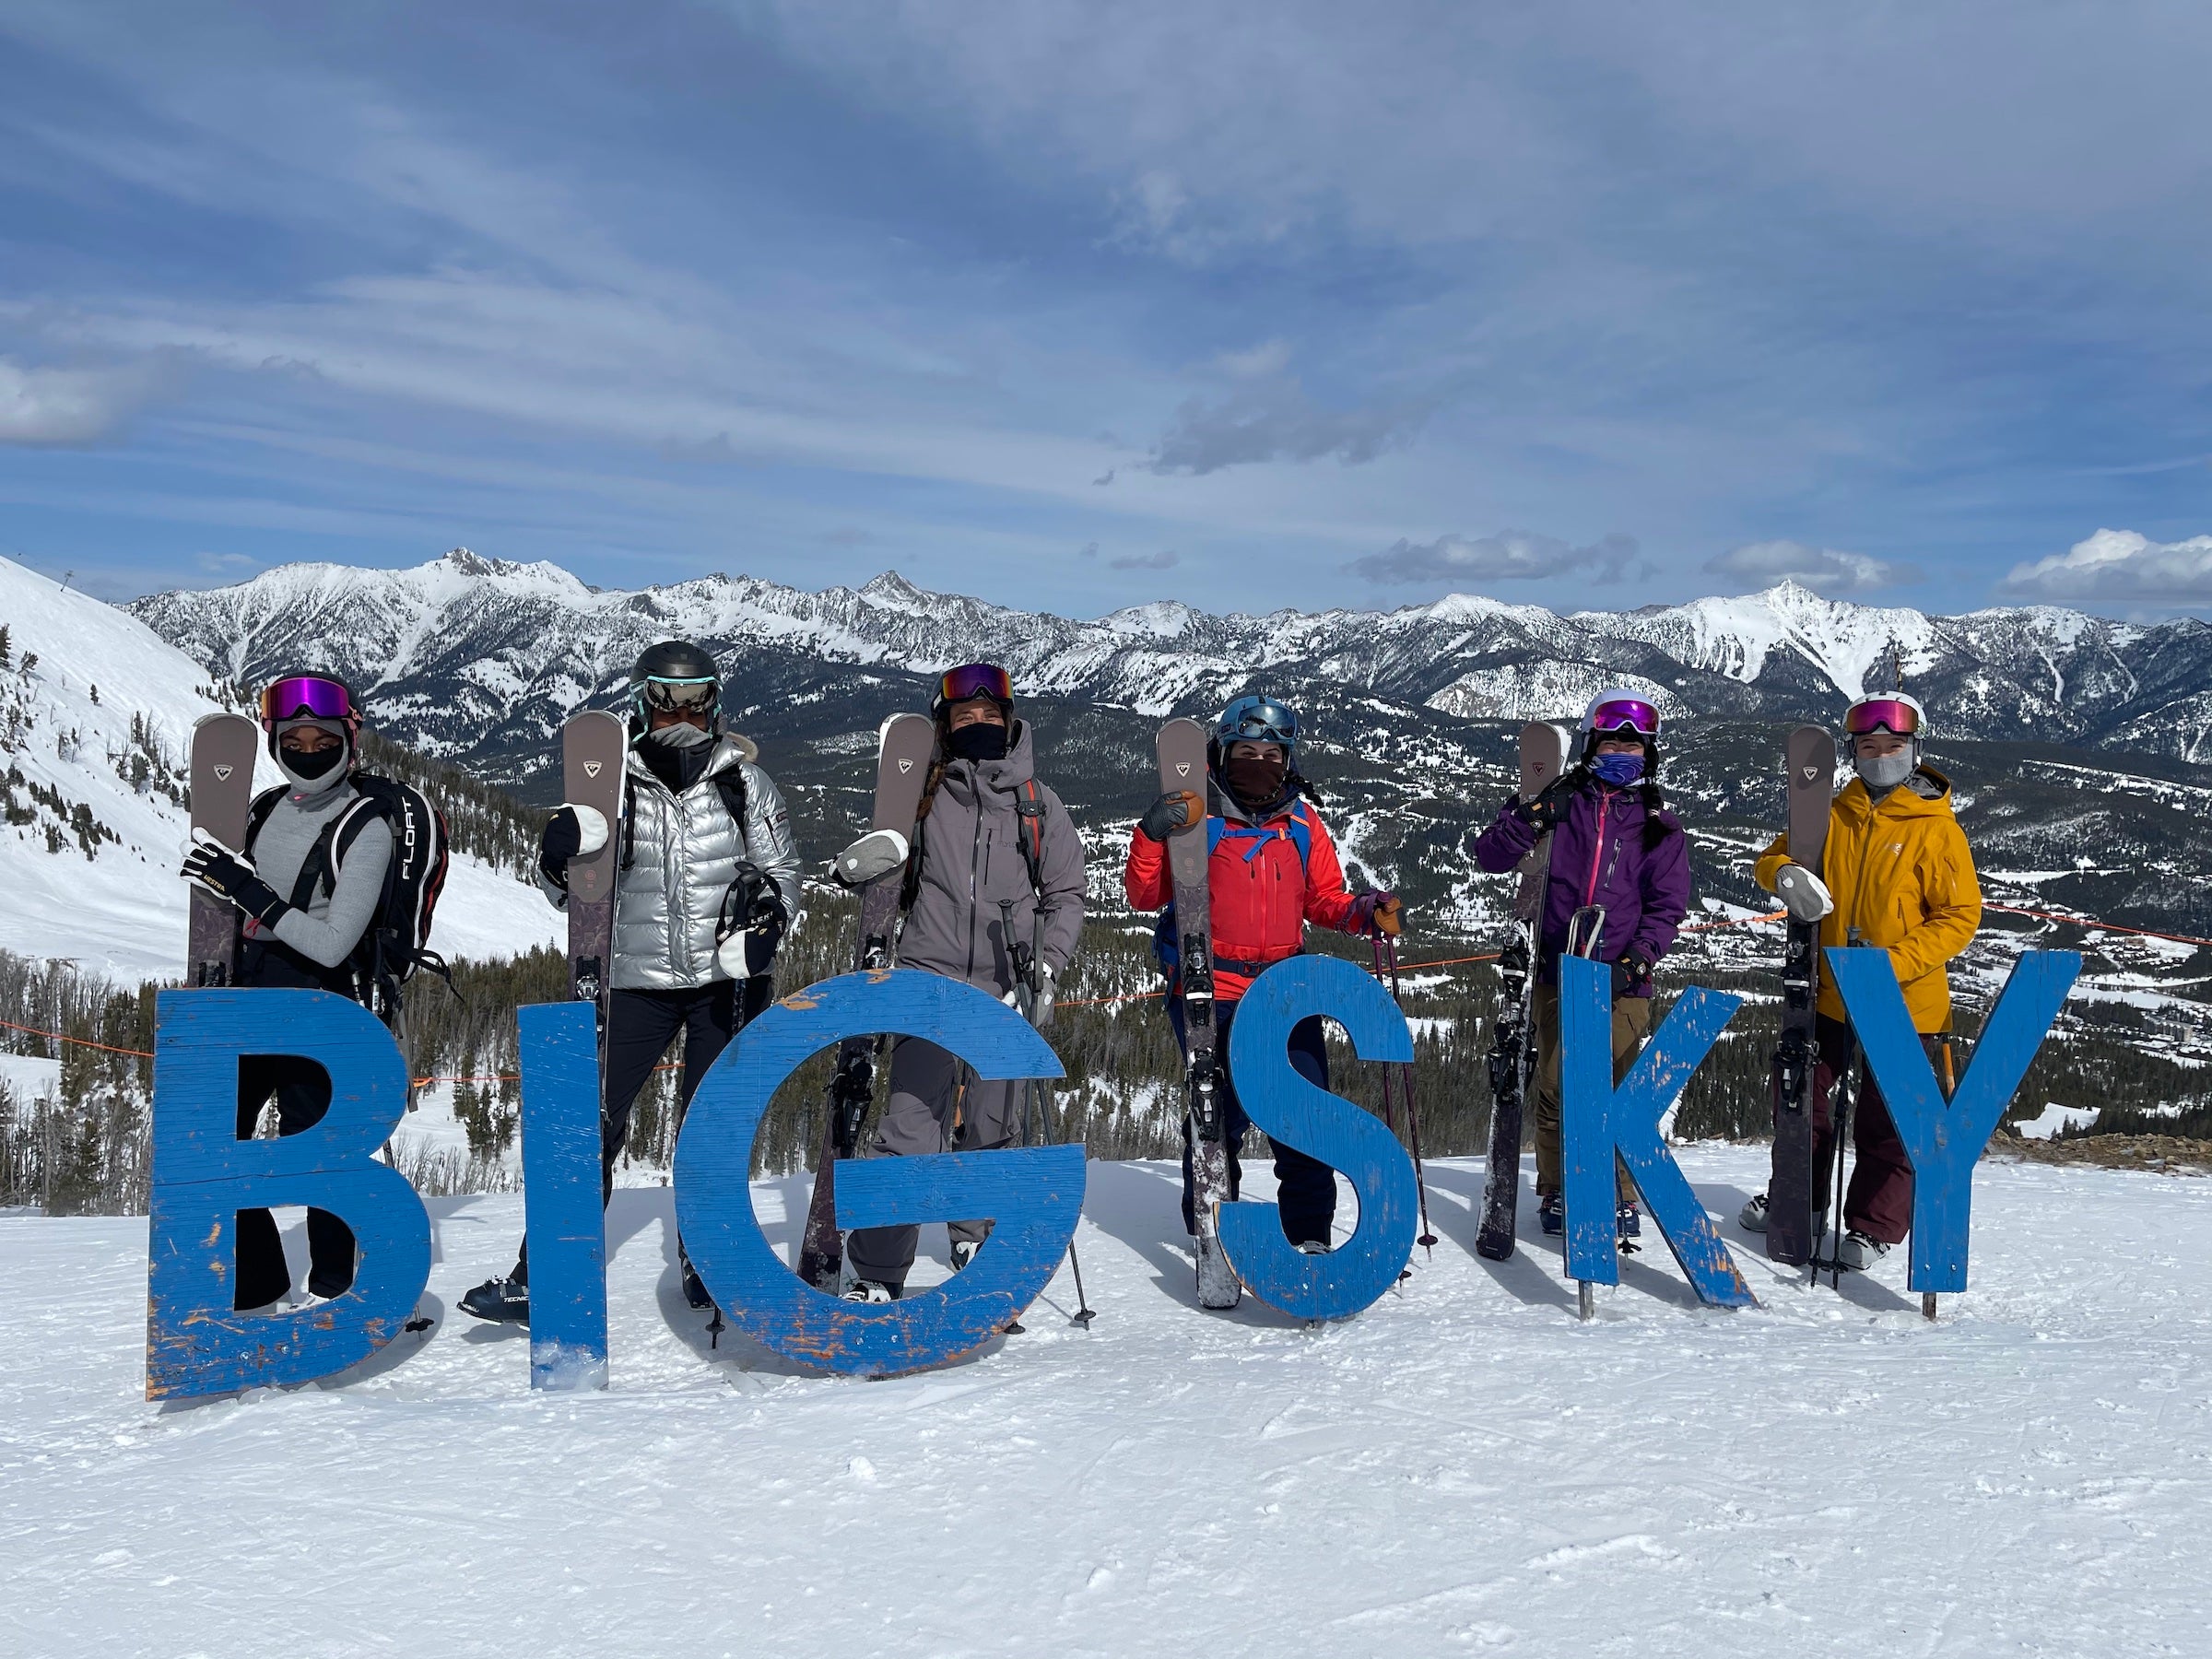 BIPOC women awarded scholarships to become ski instructors